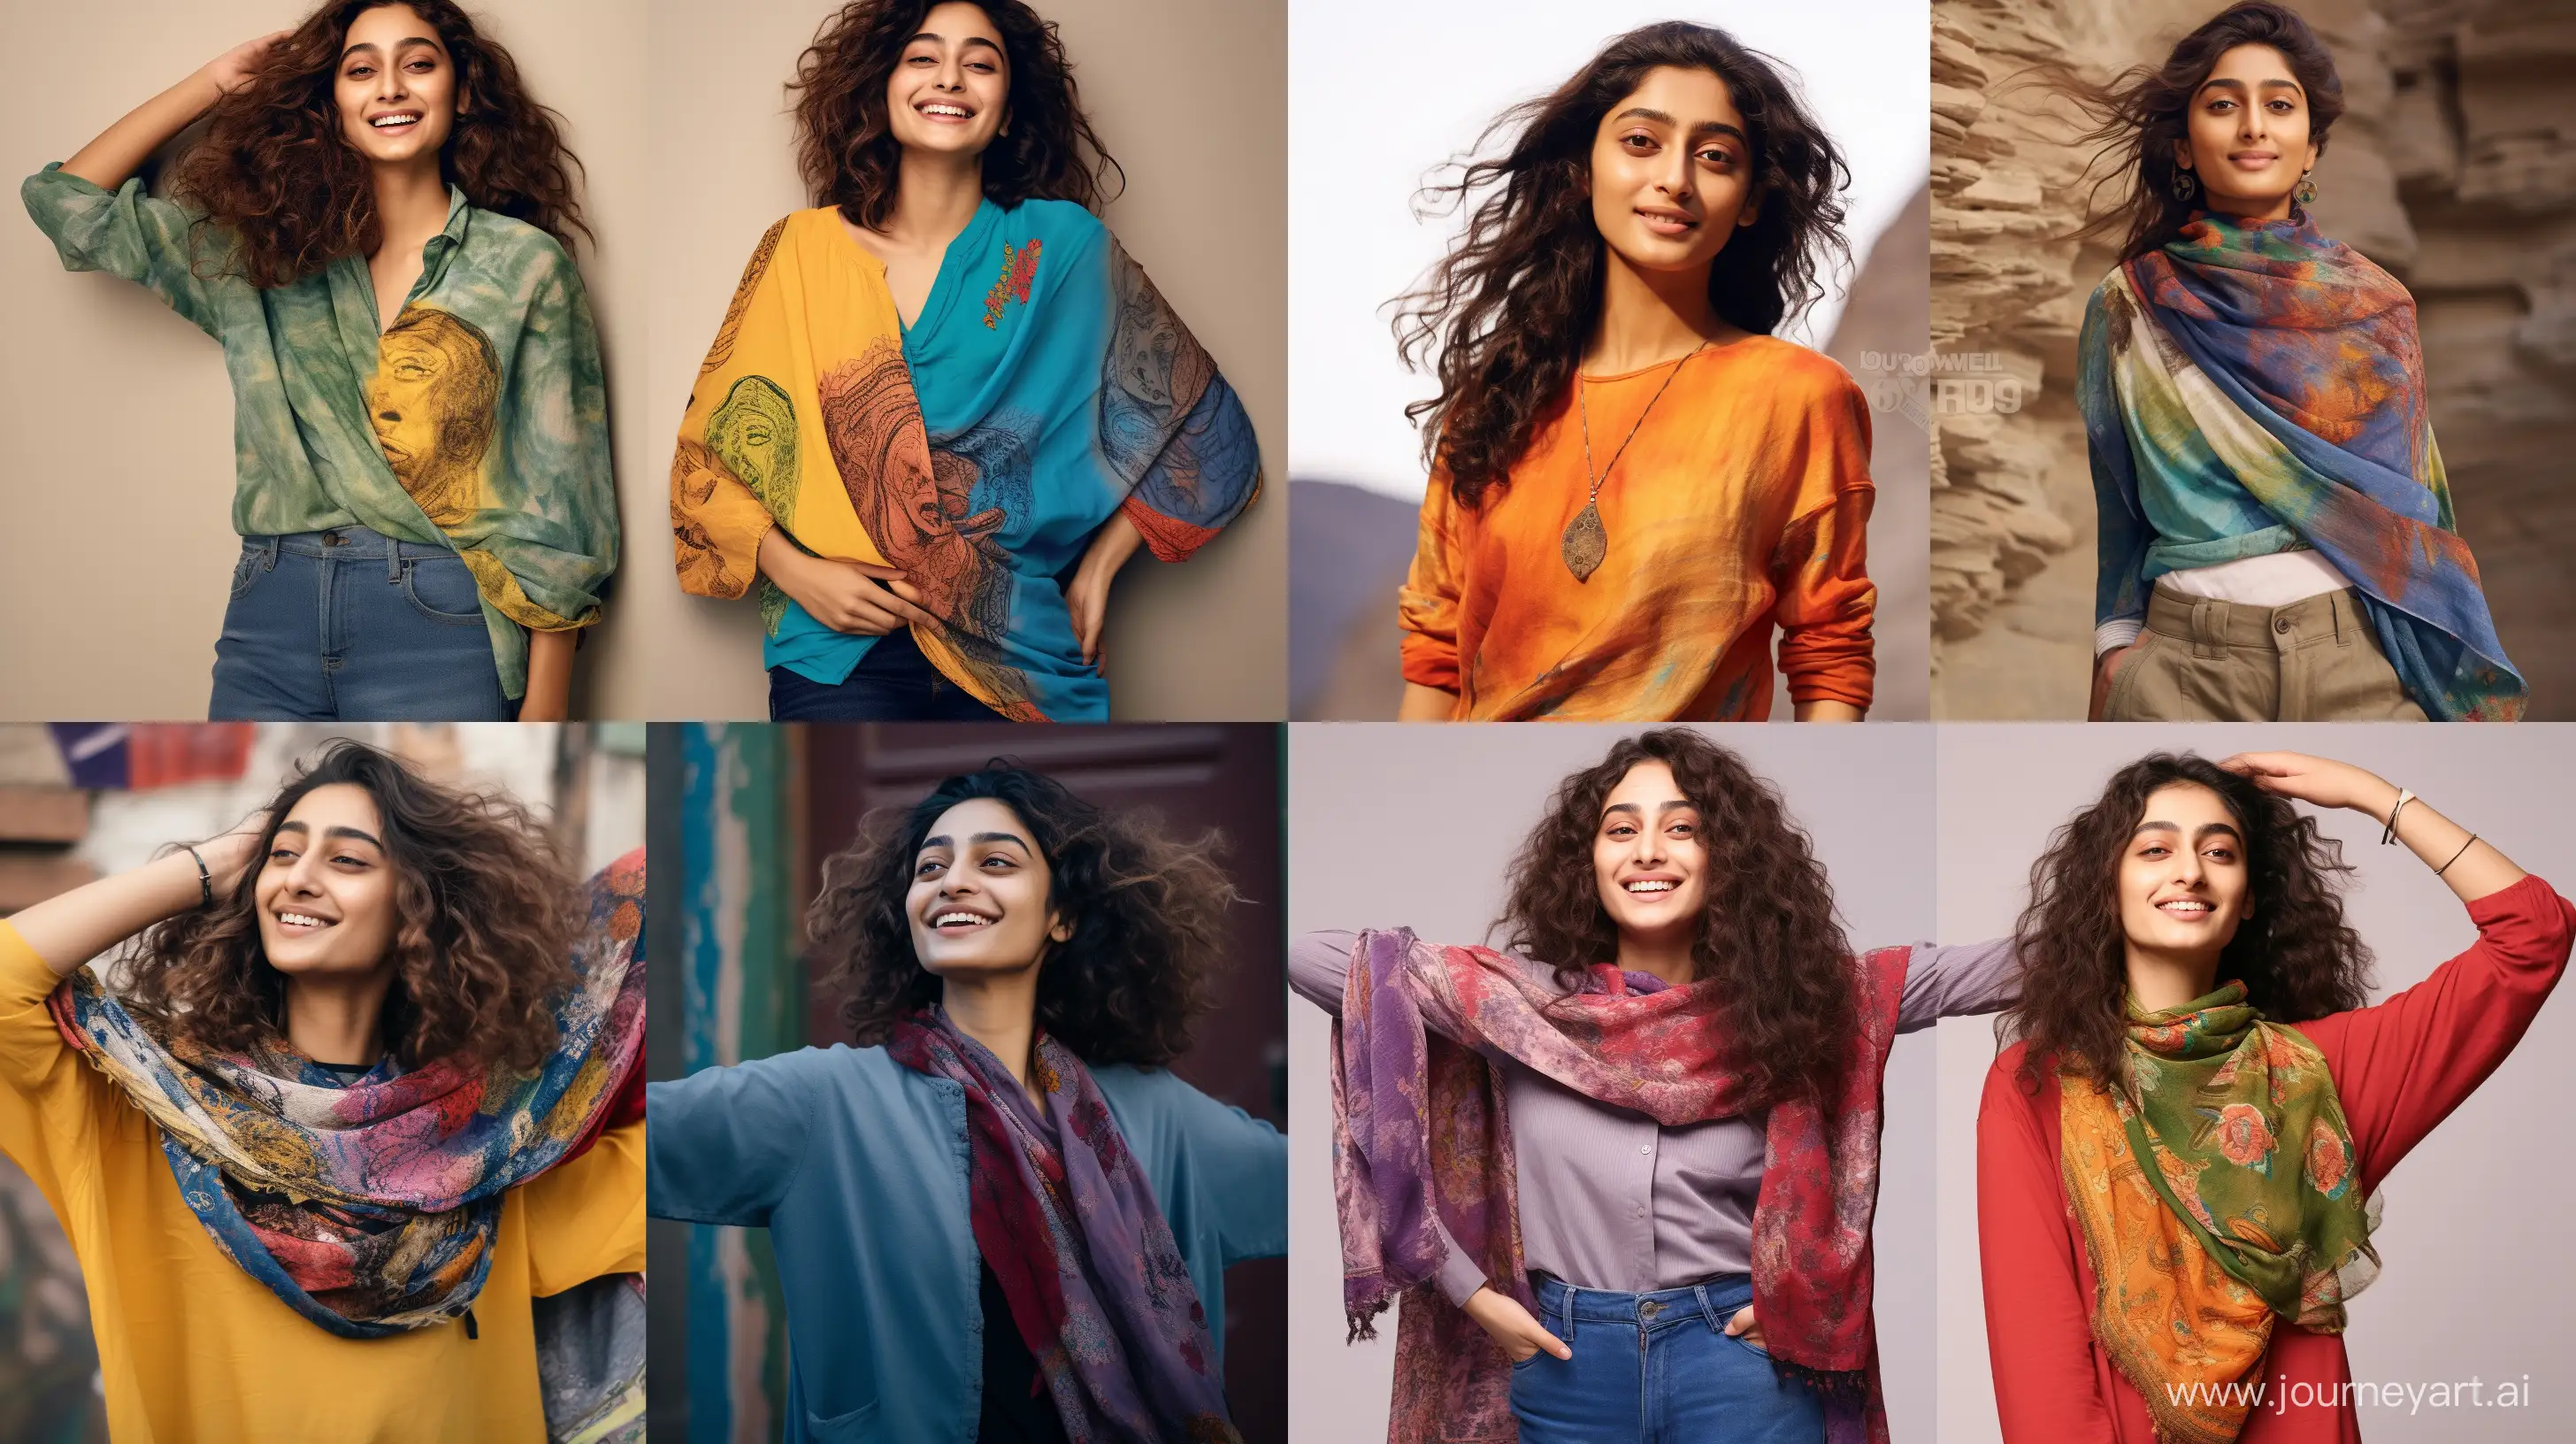 A genuine photograph divided into two parts. On the left, a joyous, plump girl resembling Golshifteh Farahani, donned in a vibrant dress, half-hair-covered scarf, long-sleeved tee, and jeans. On the right, a fit, content girl resembling Golshifteh Farahani, sporting a well-proportioned figure, cheerful dress, half-hair-covered scarf, long-sleeved tee, and jeans. The uniform blue background sets the stage for their happiness, creating a visual dichotomy. Photography, DSLR camera with a 50mm lens, capturing genuine smiles and natural lighting, --ar 16:9